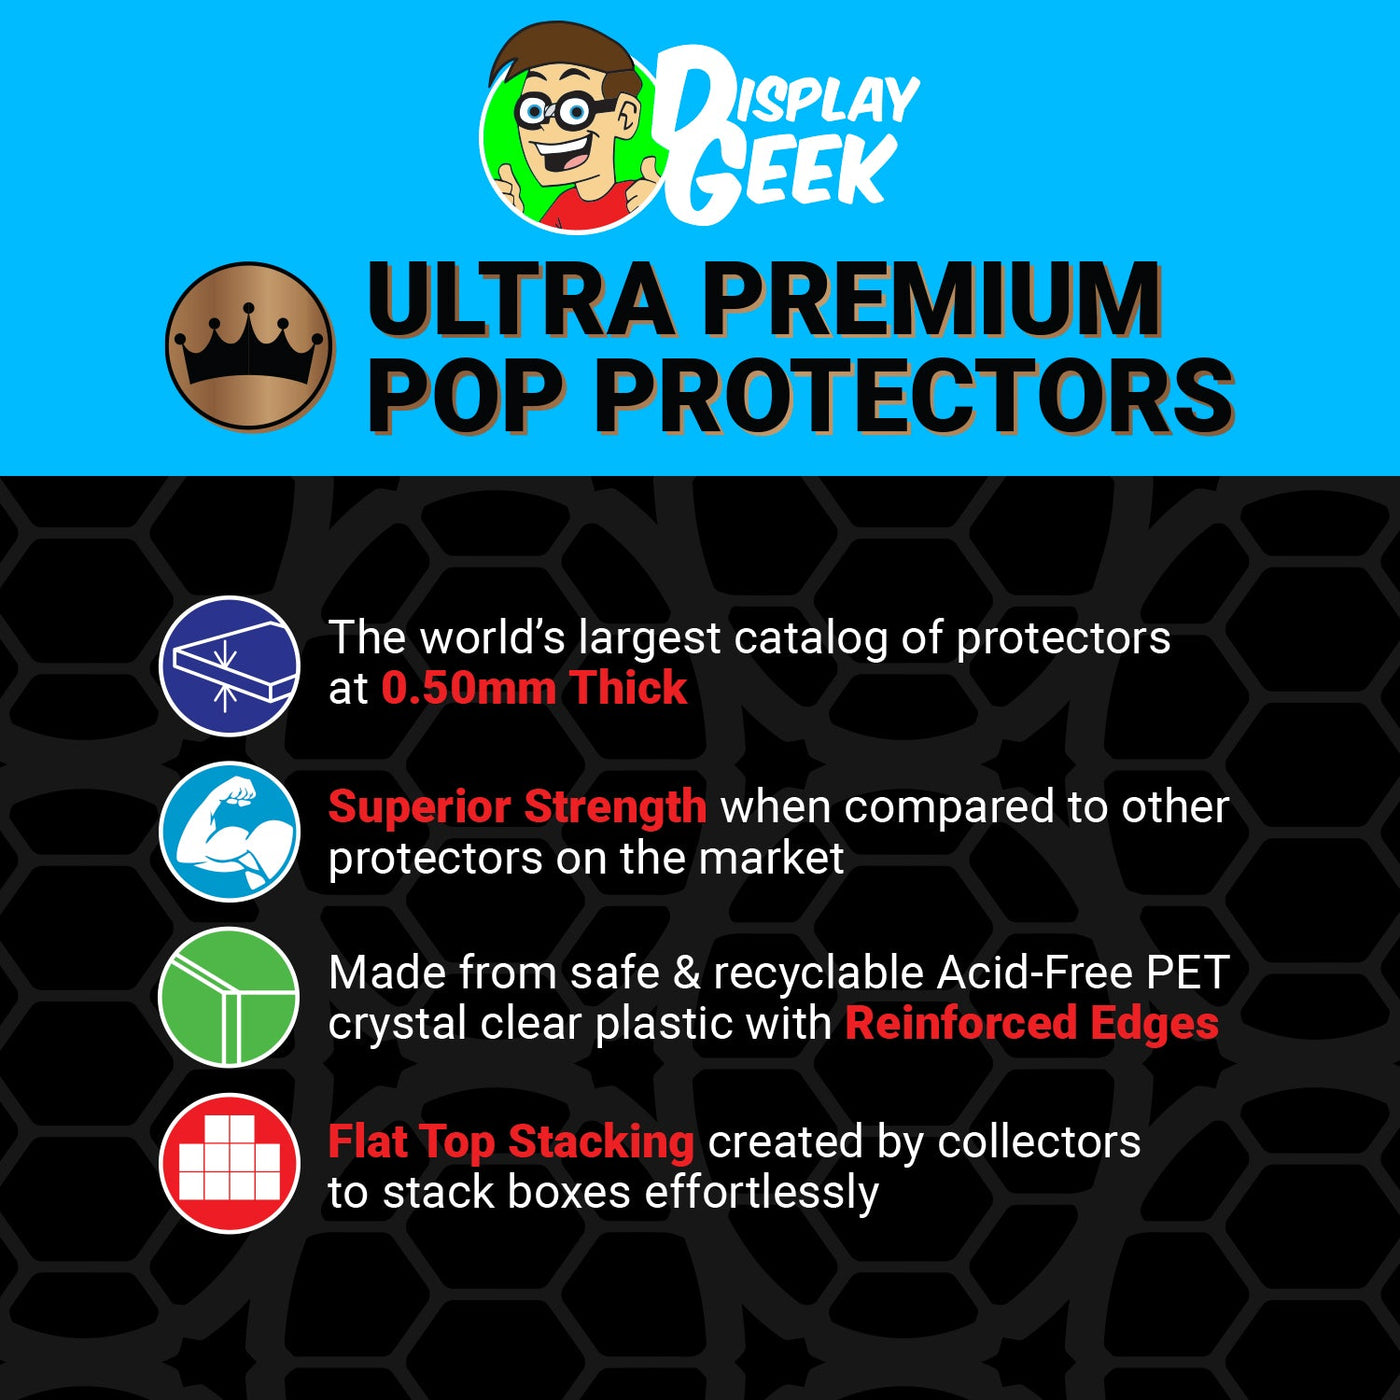 Pop Protector for Under The Moonlight Nightmare #458 Funko Pop Movie Moments on The Protector Guide App by Display Geek